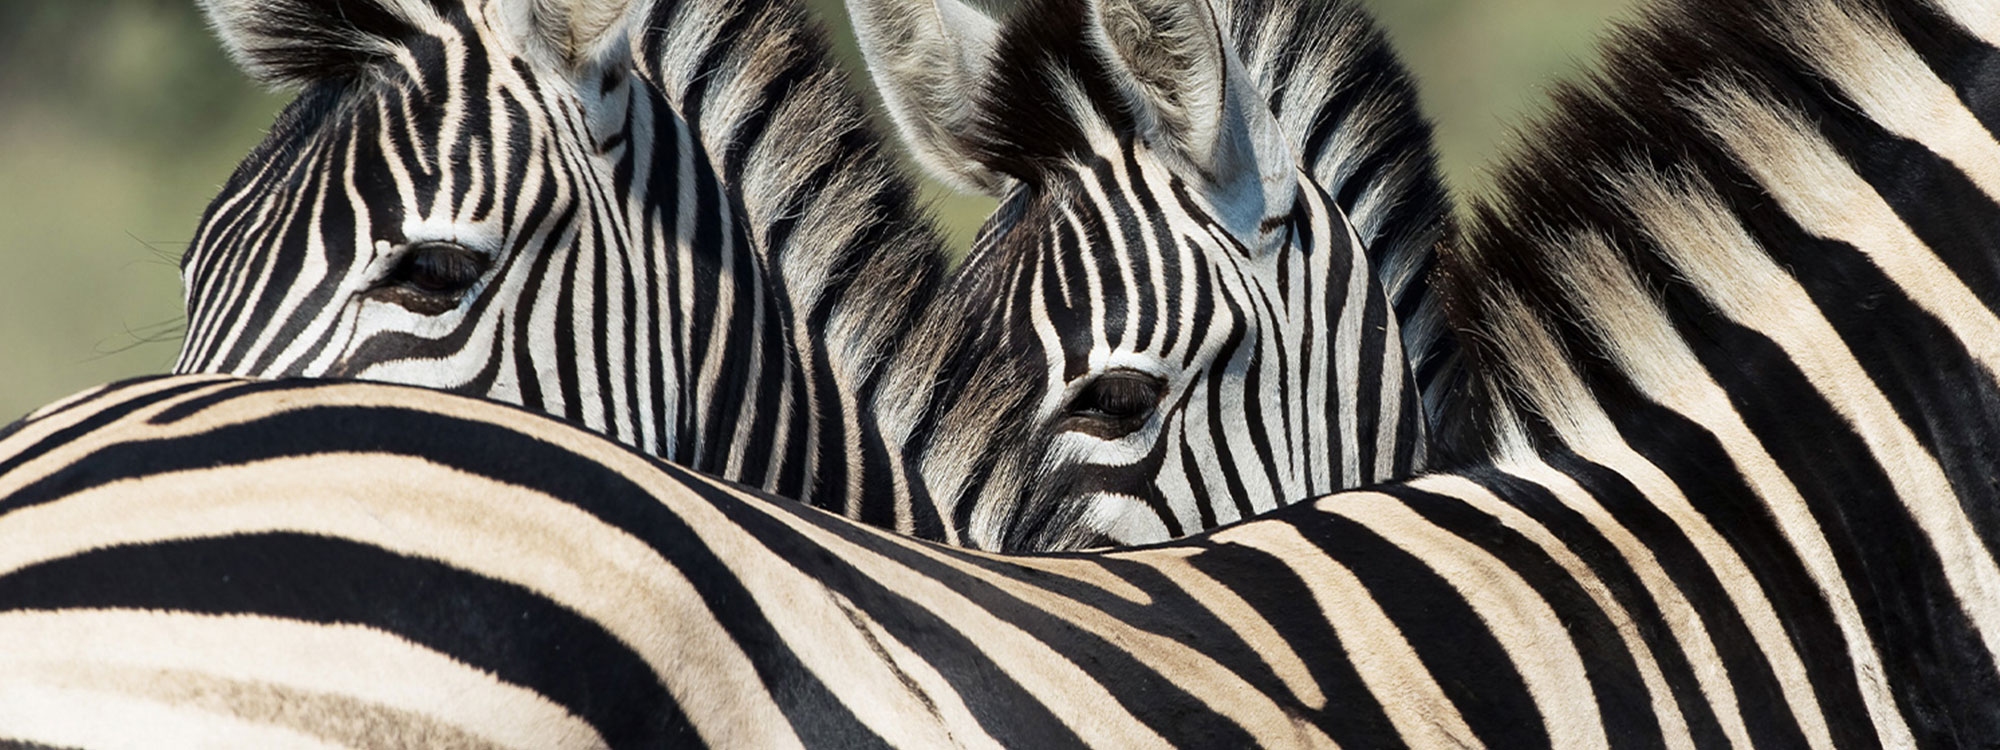 Close up of two zebras